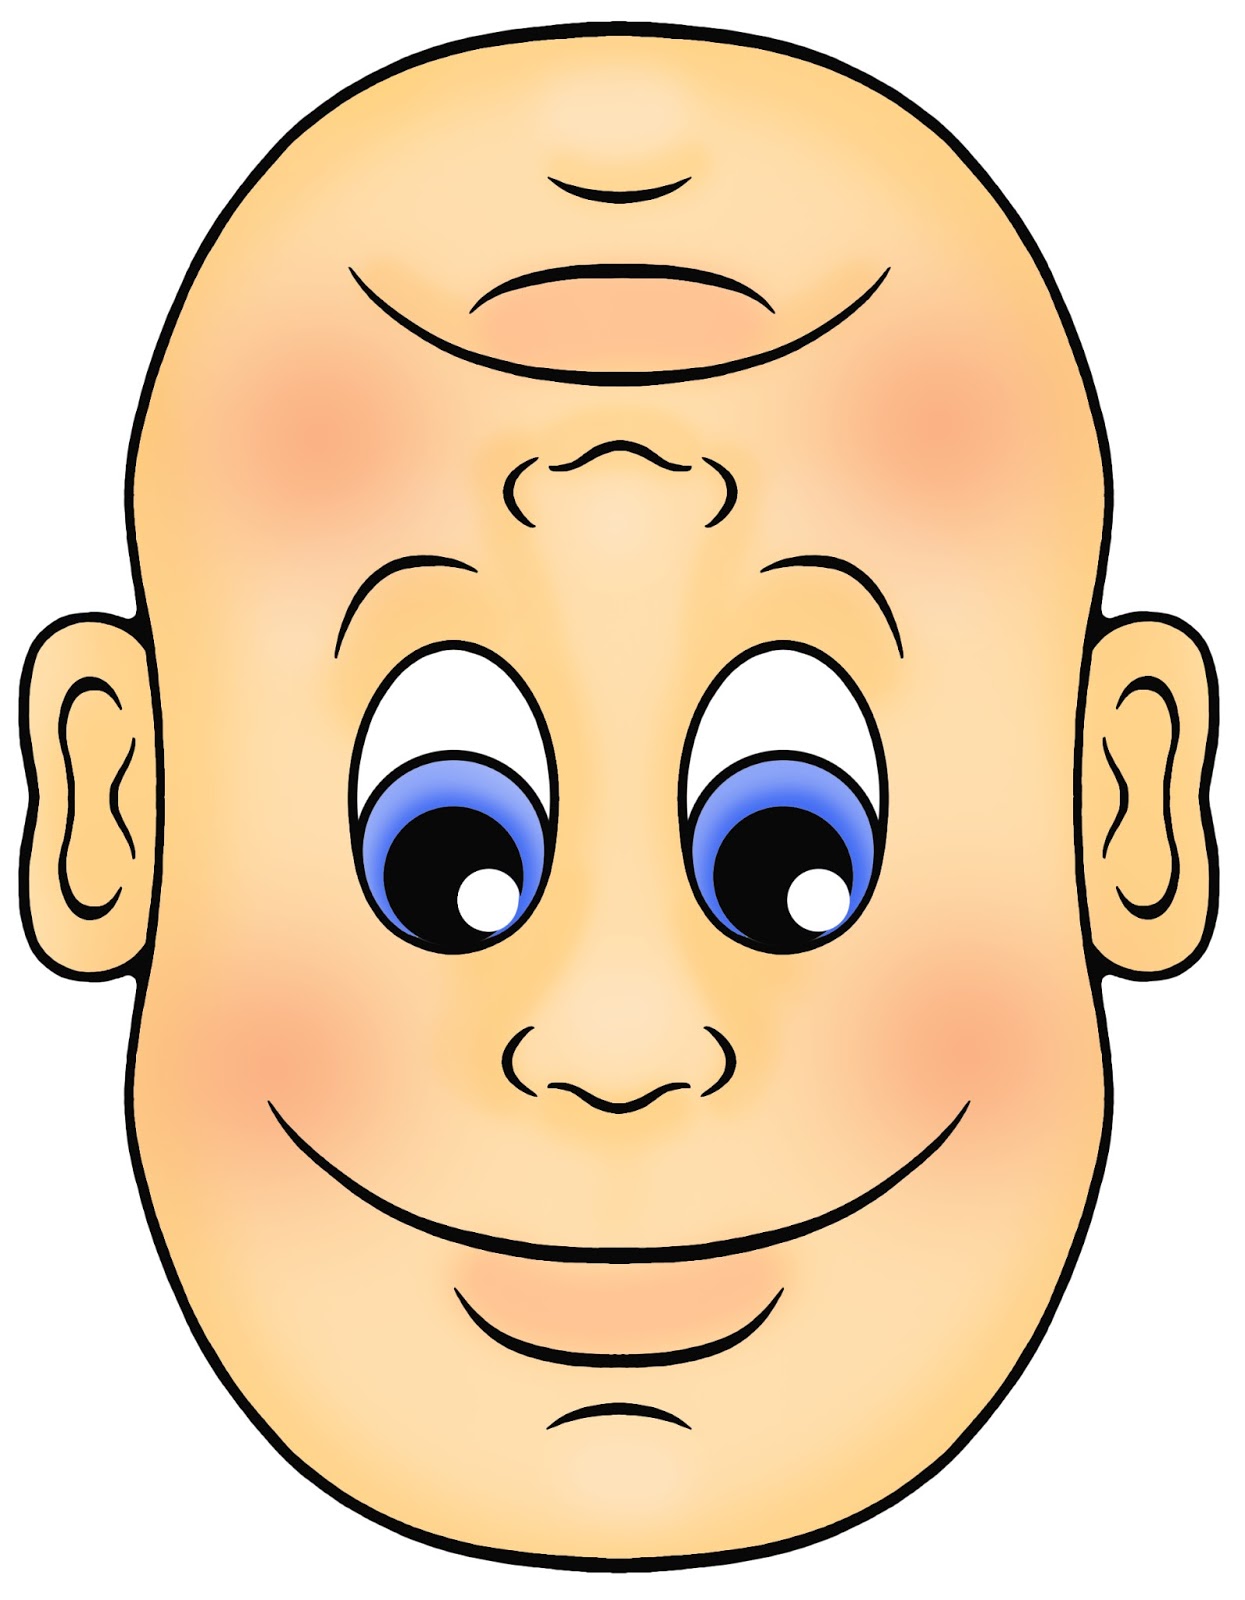 Frowny Face Emoticon - ClipArt Best